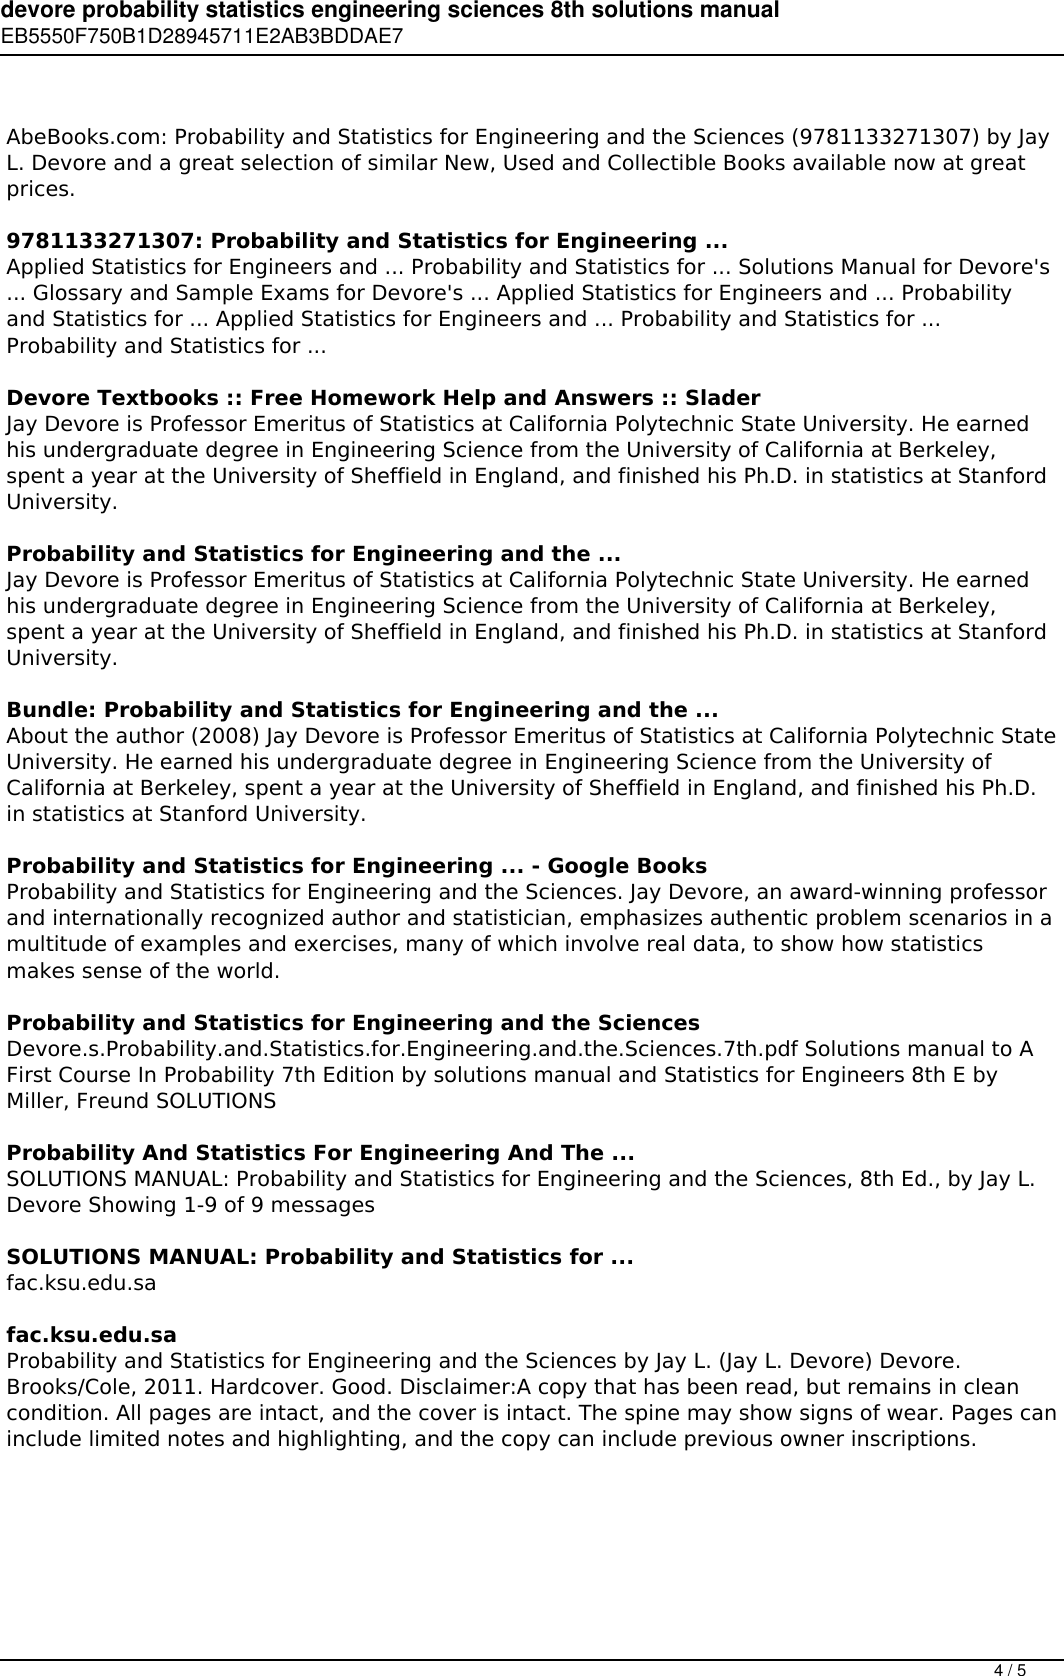 Page 4 of 5 - Devore Probability Statistics Engineering Sciences 8th Solutions Manual